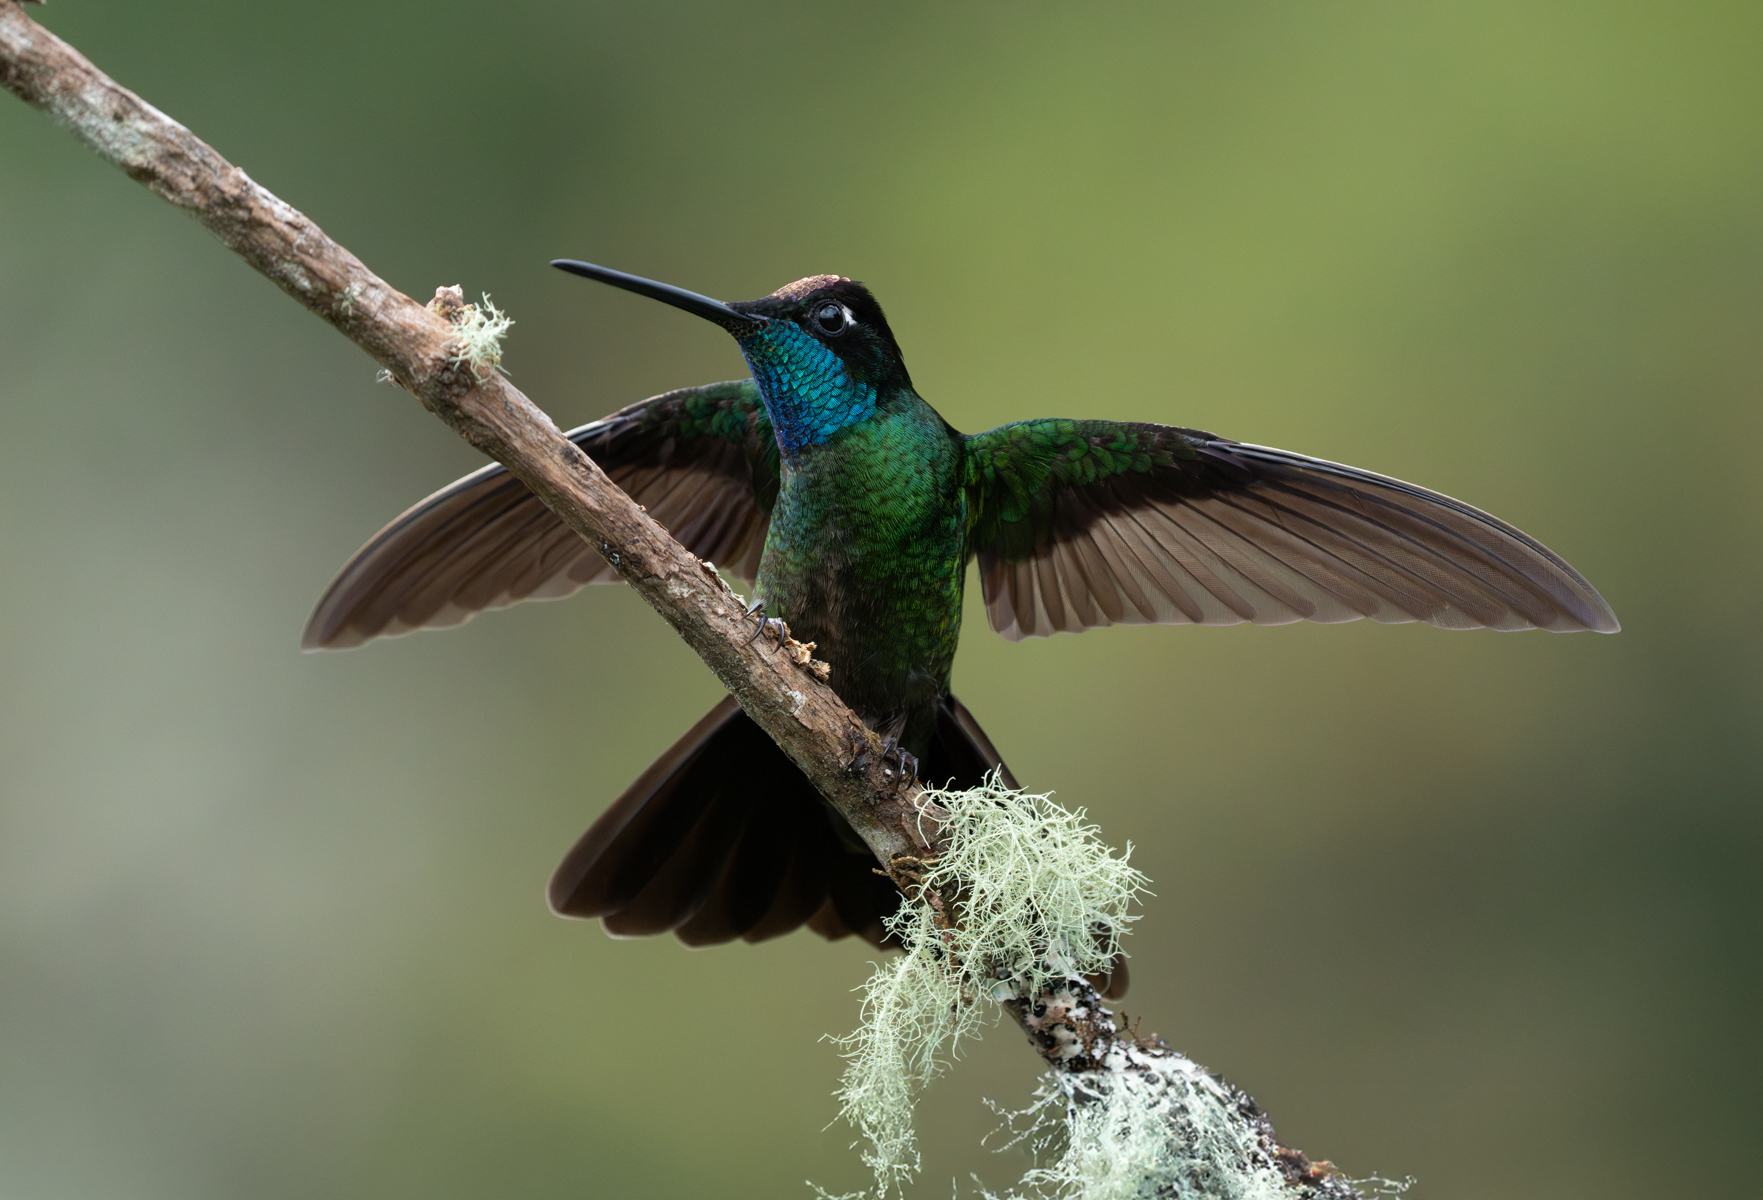 A Talamanca Hummingbird with its wings outstretched in a show of aggression (image by Inger Vandyke)